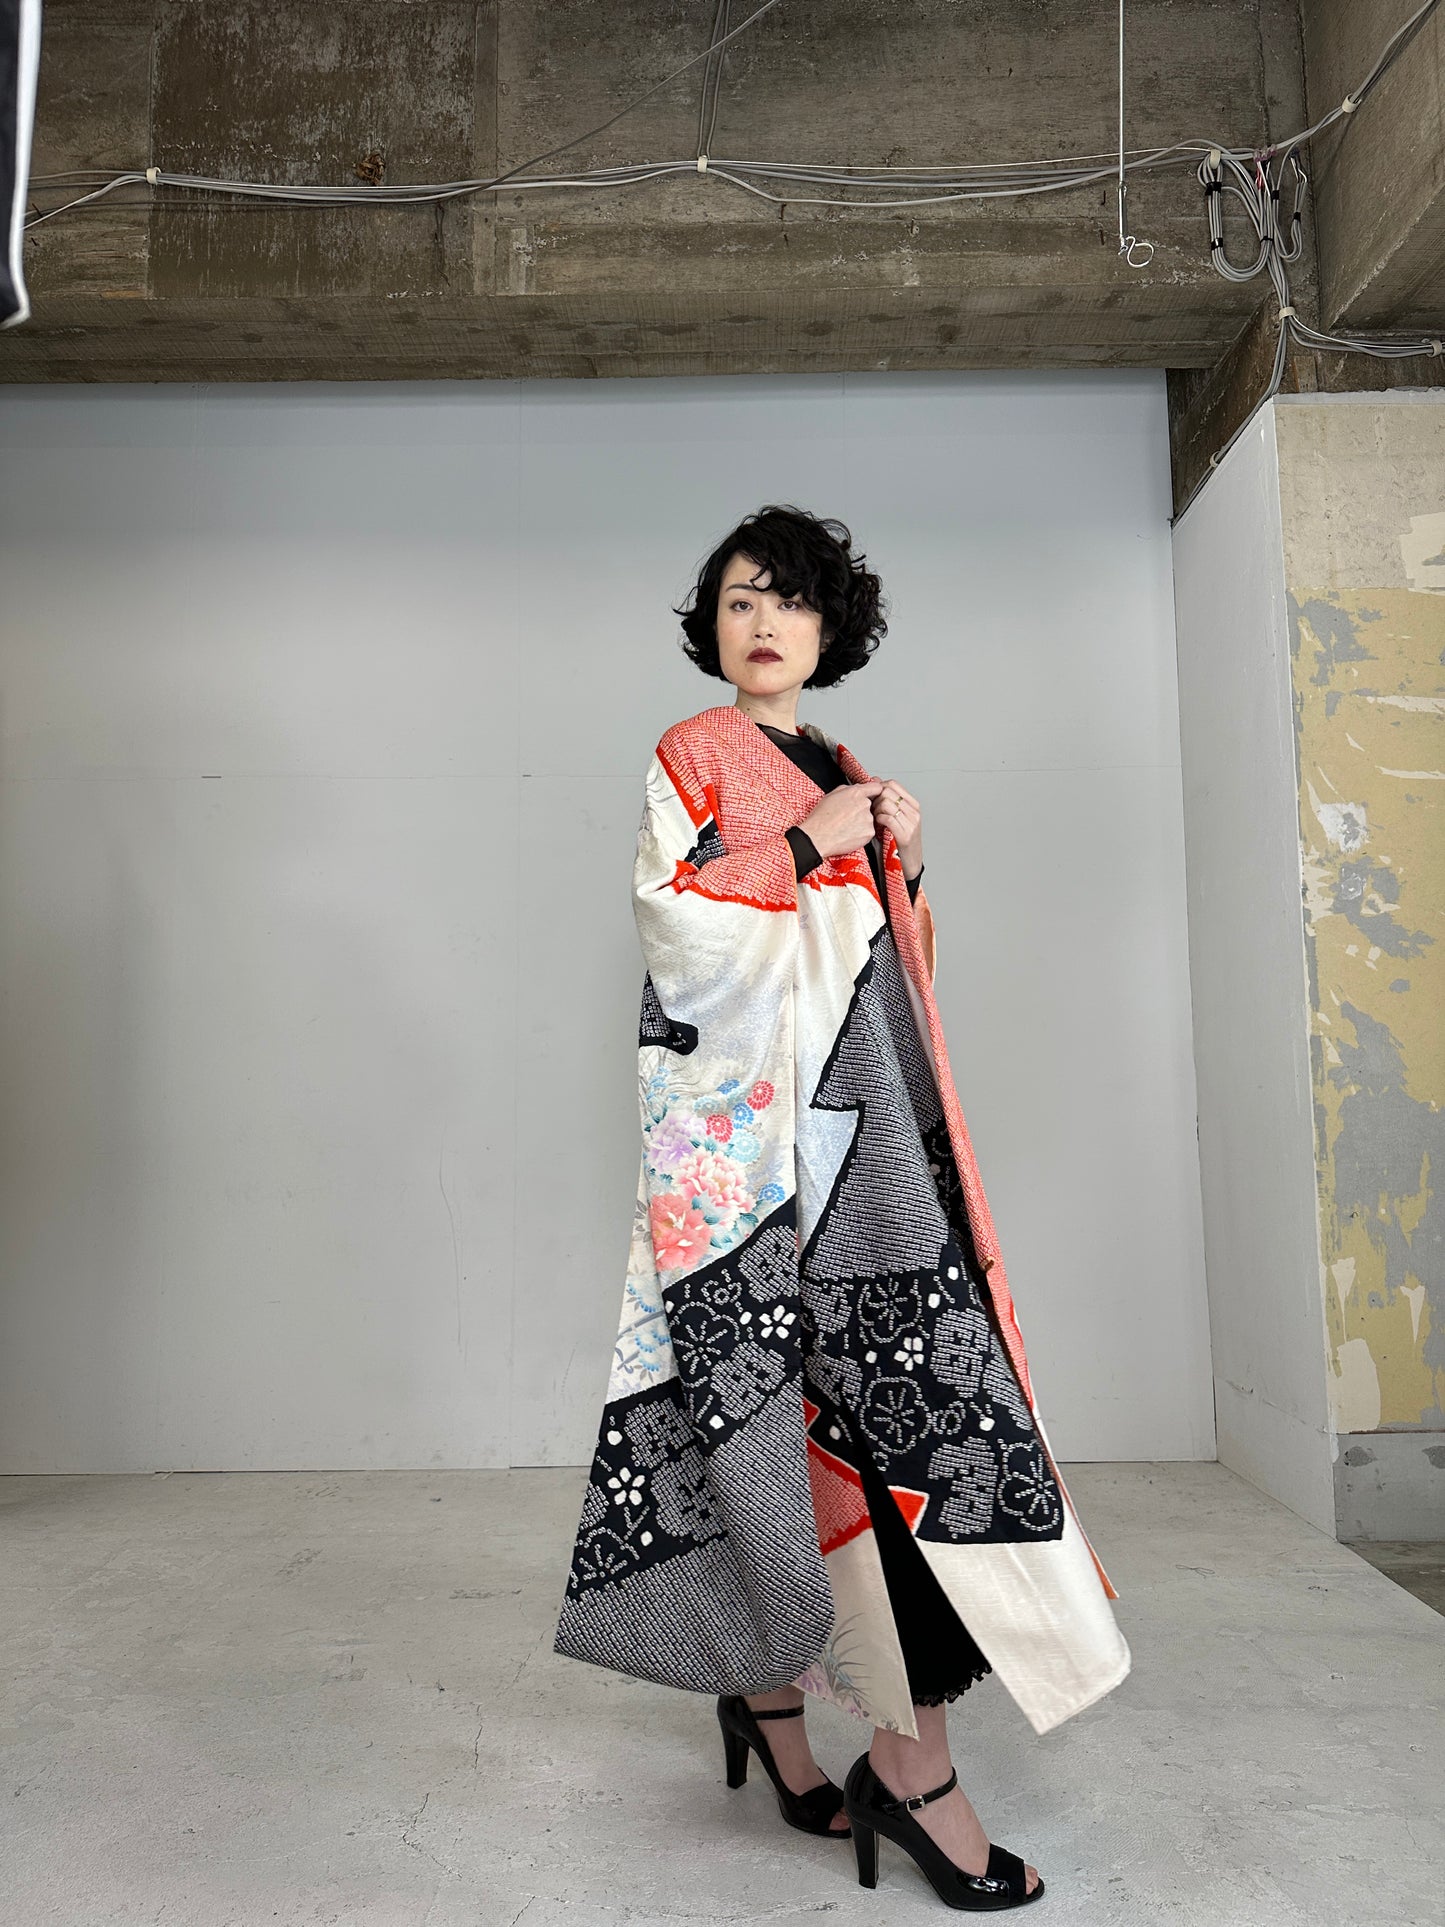 Furisode Kimono dress gown and string belt upcycled from Japanese kimono "furisode mix"